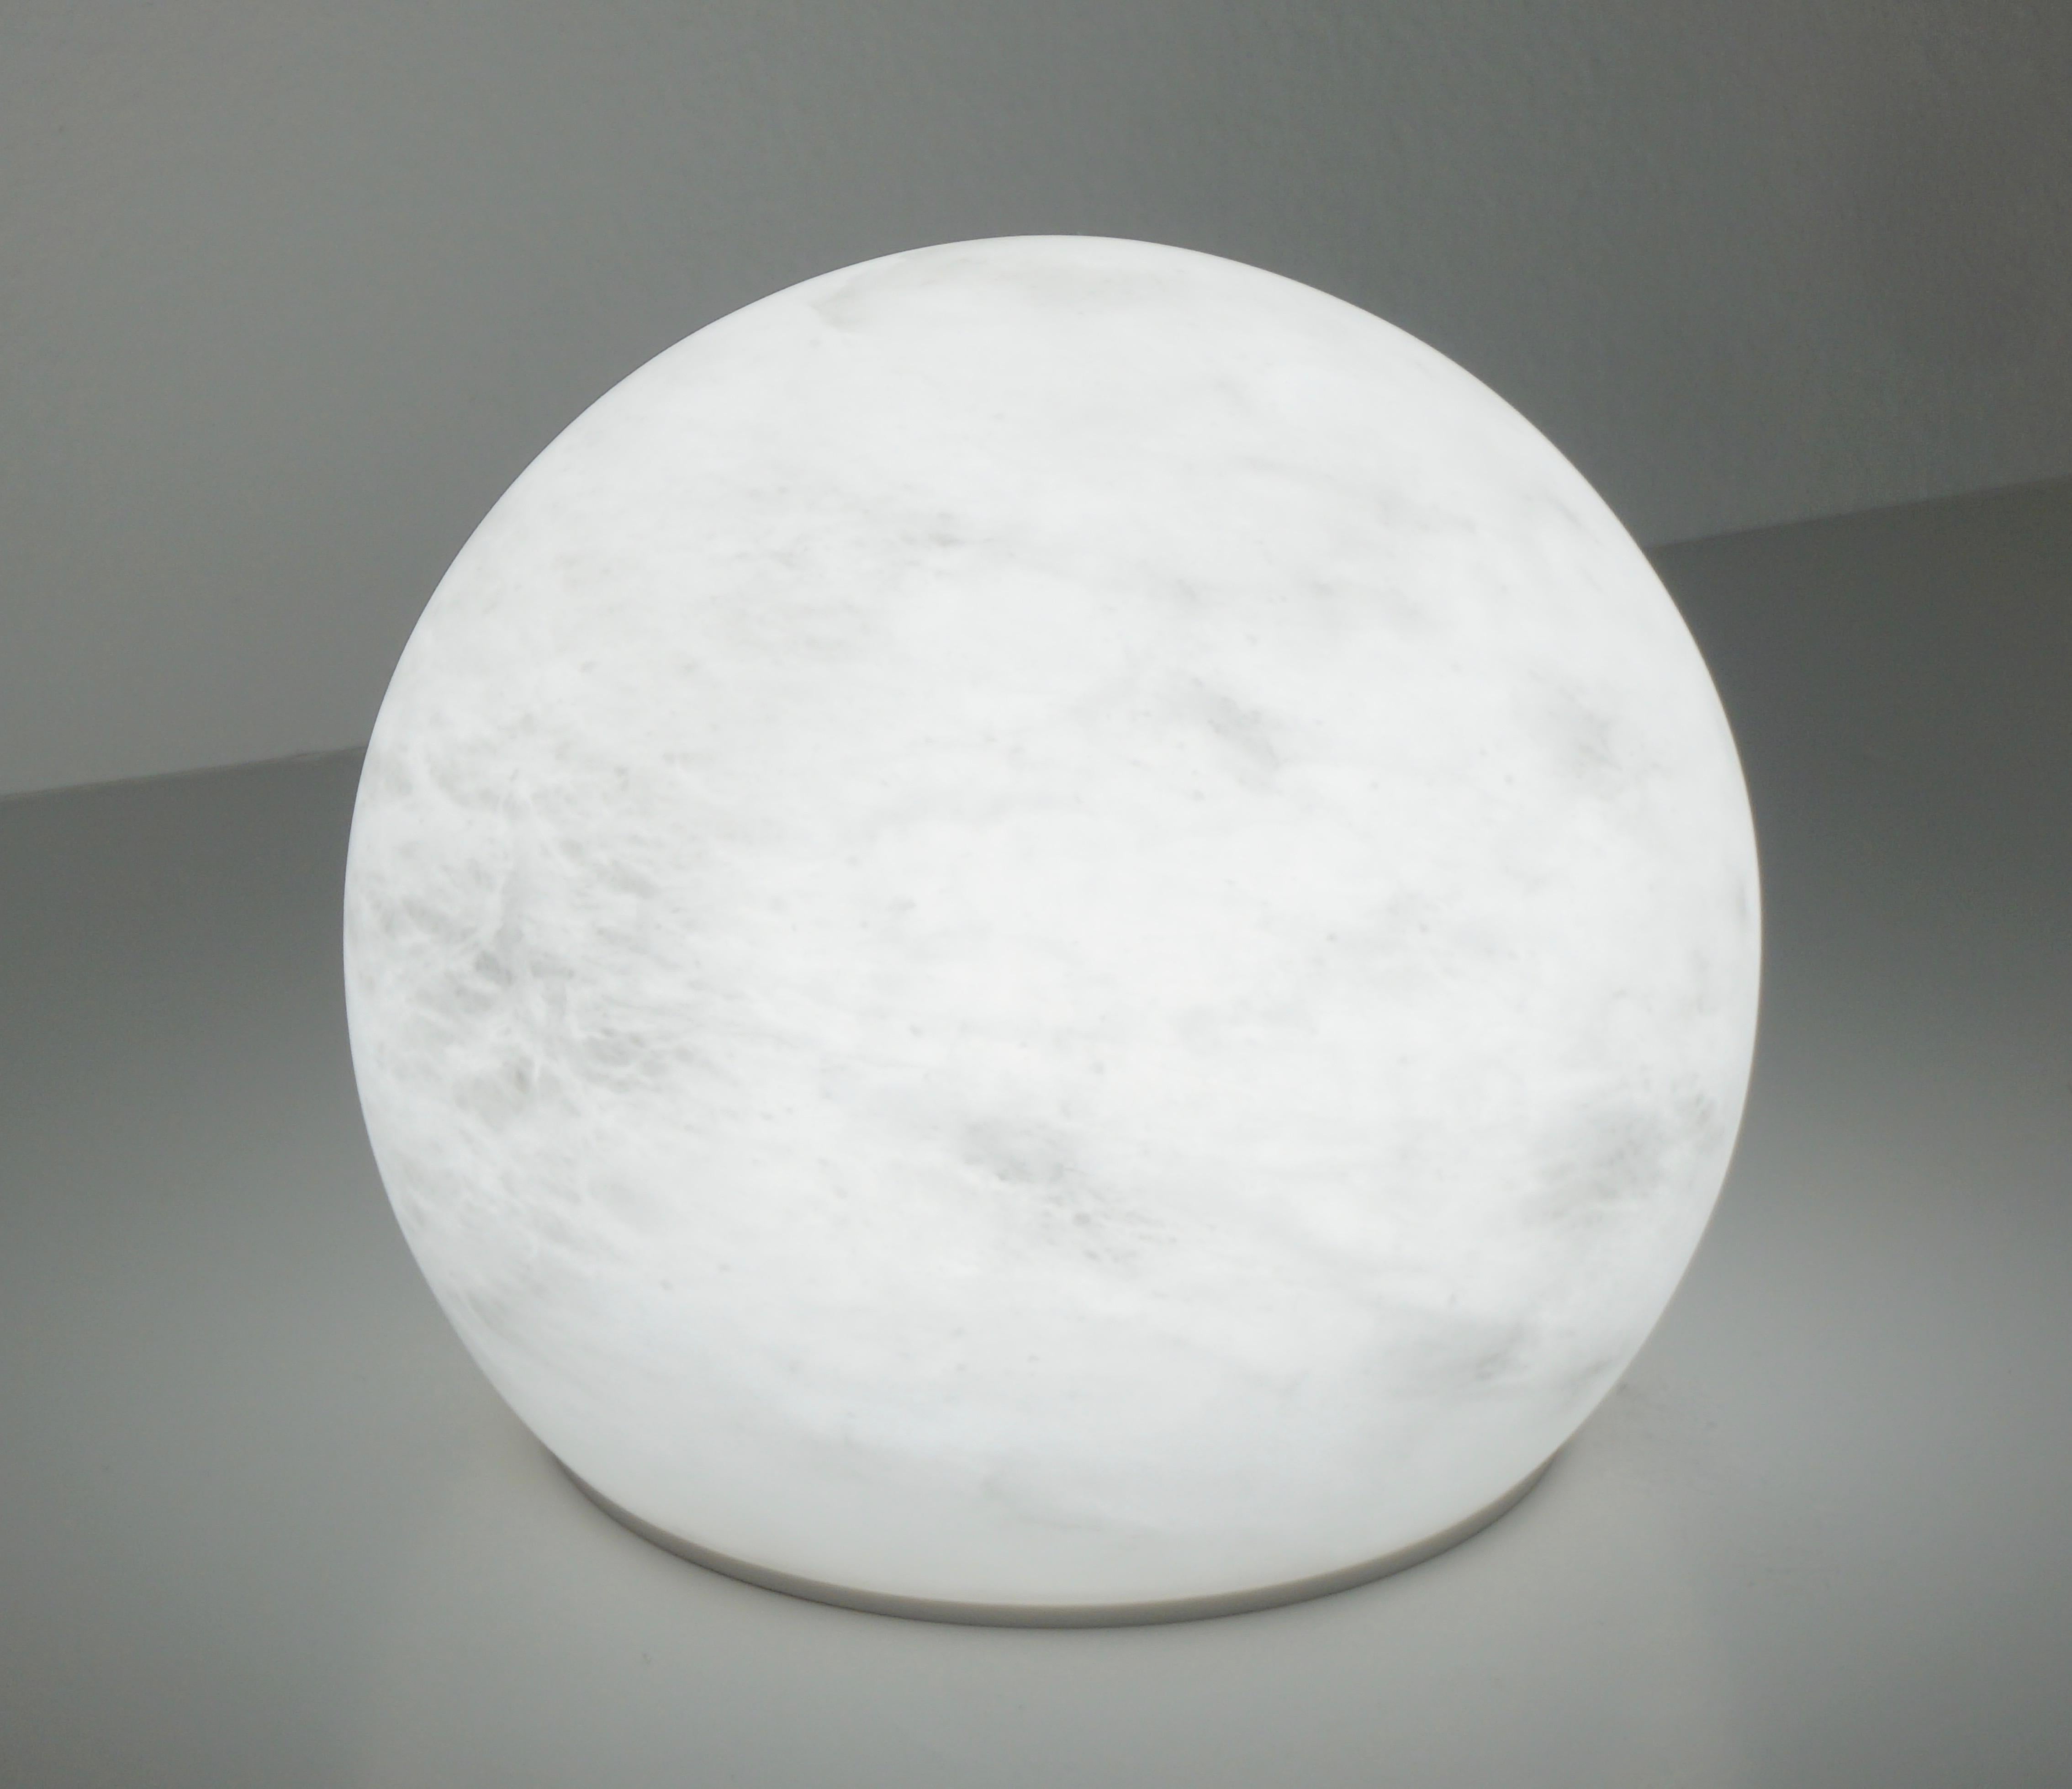 Bespoke Italian Minimalist White Alabaster Moon Wireless Round Table/Desk Lamp In New Condition For Sale In New York, NY